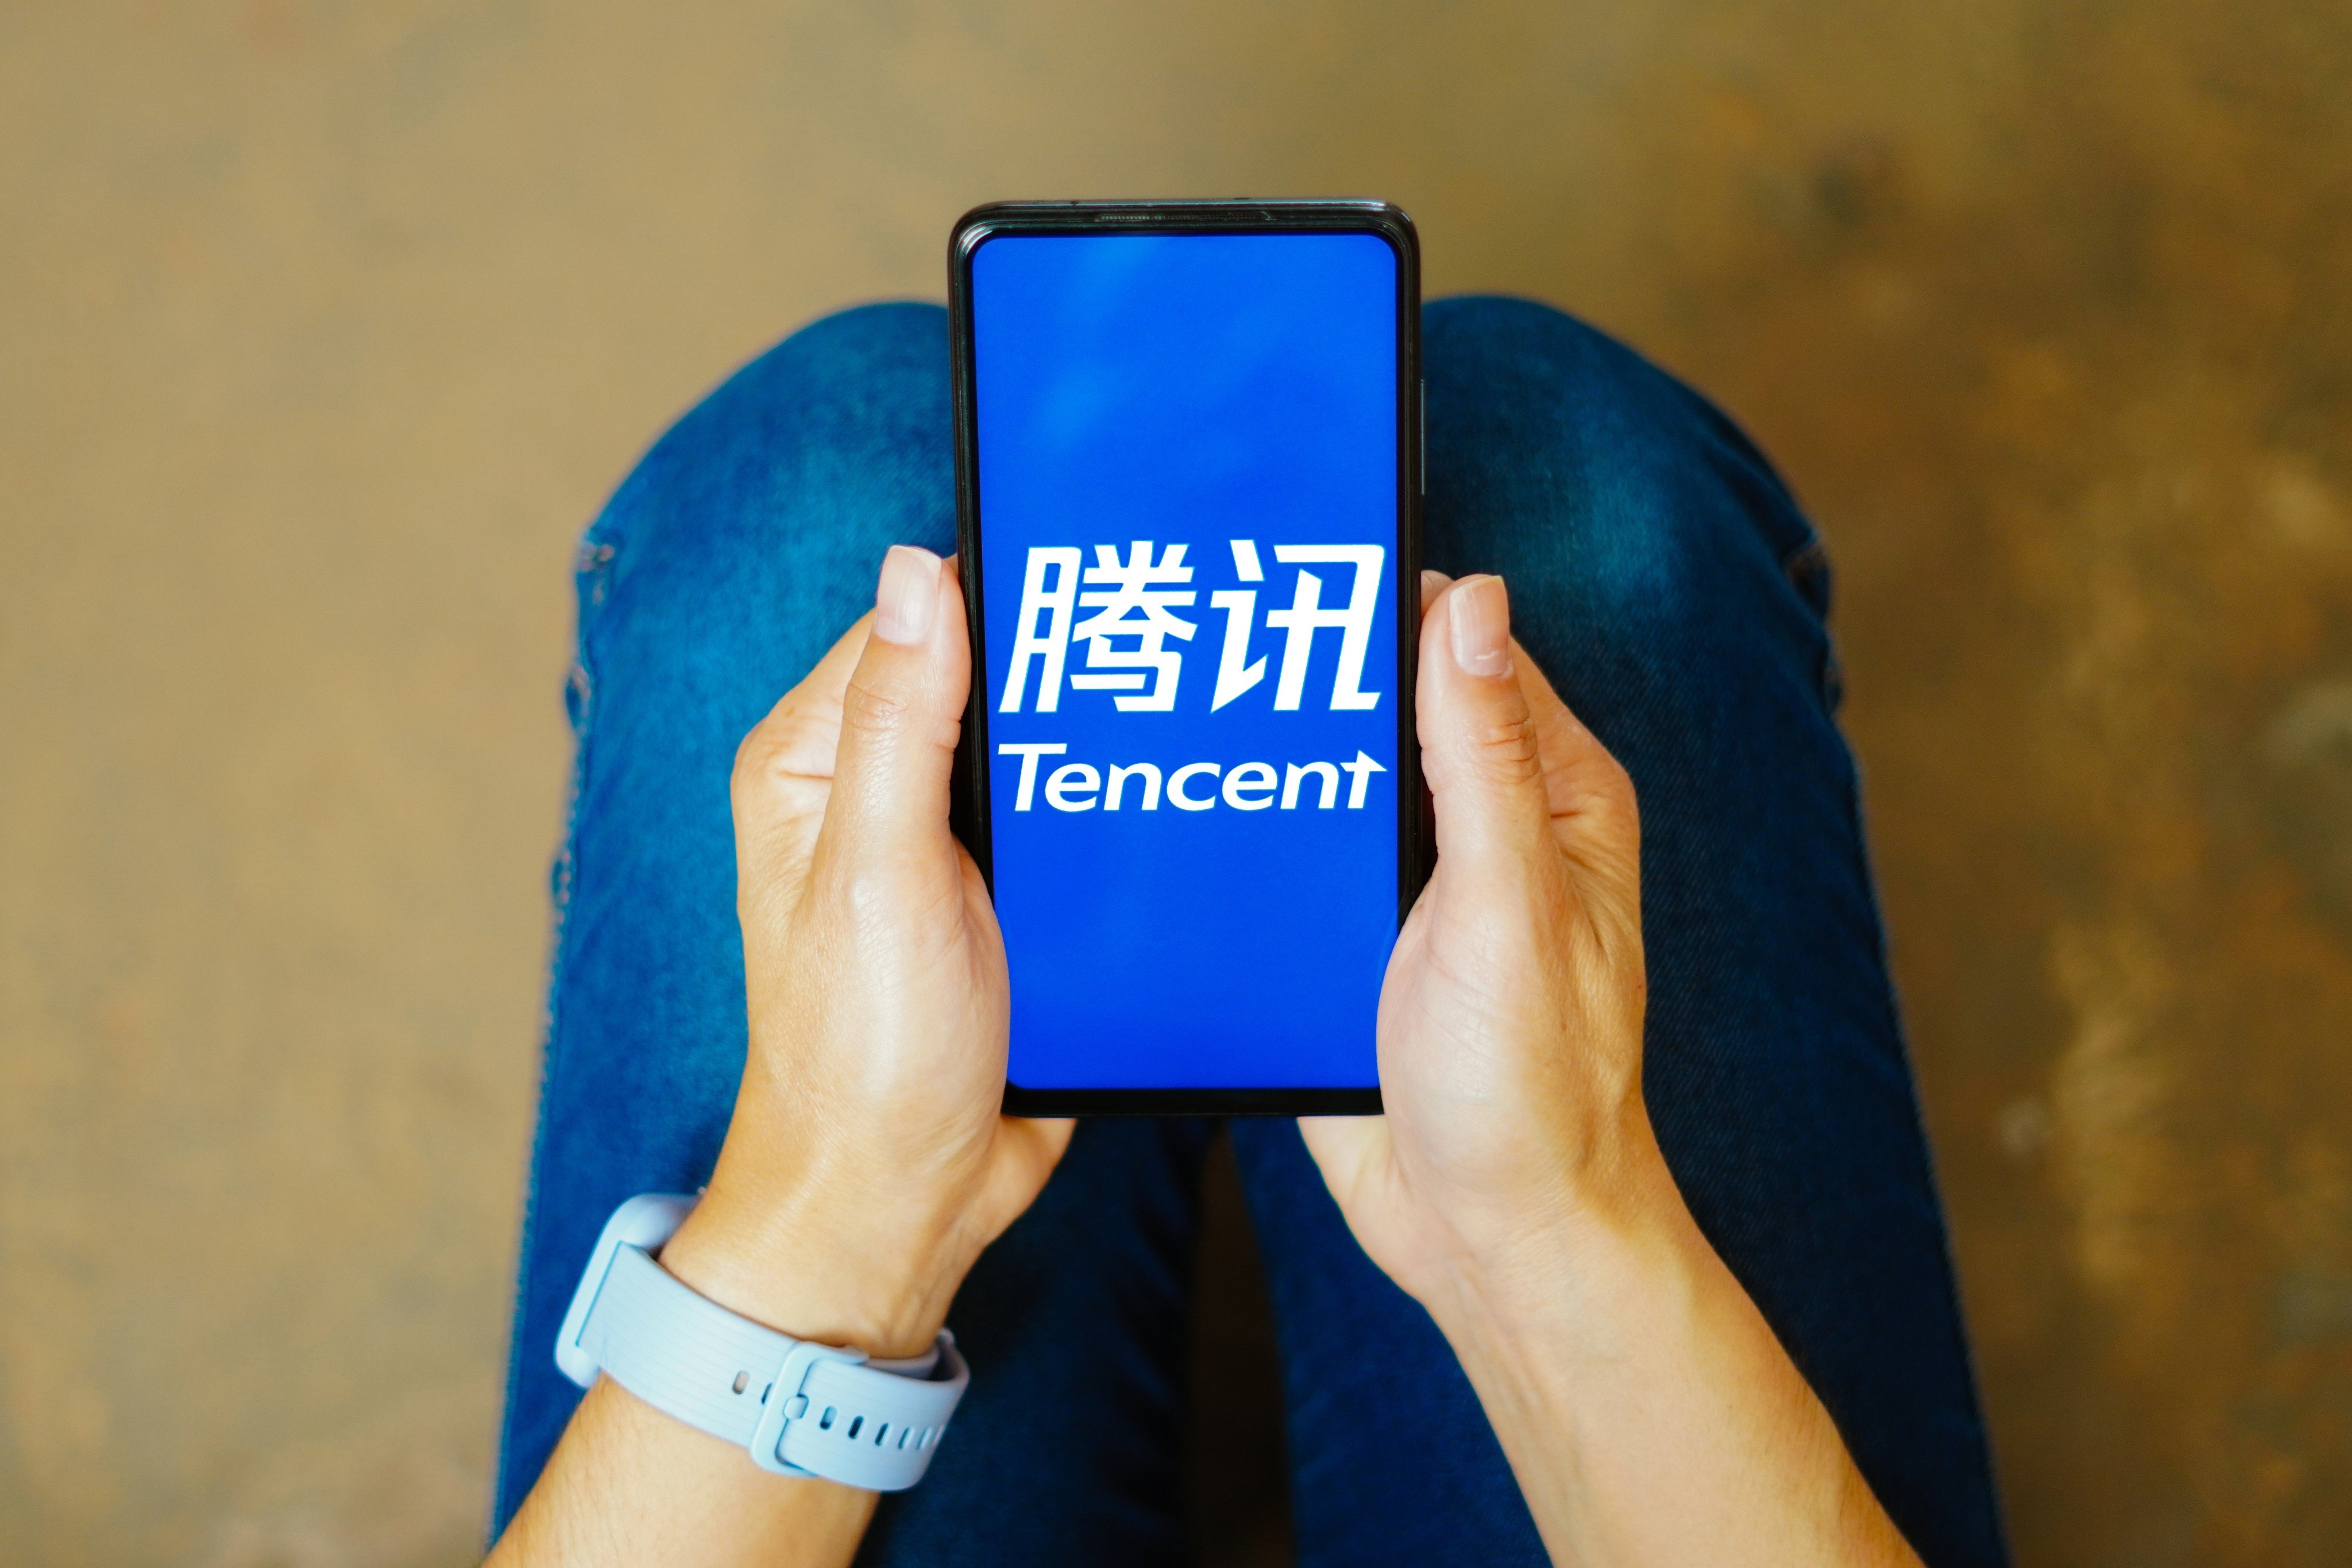 The Tencent logo is seen displayed on a smartphone. Photo: Shutterstock Images